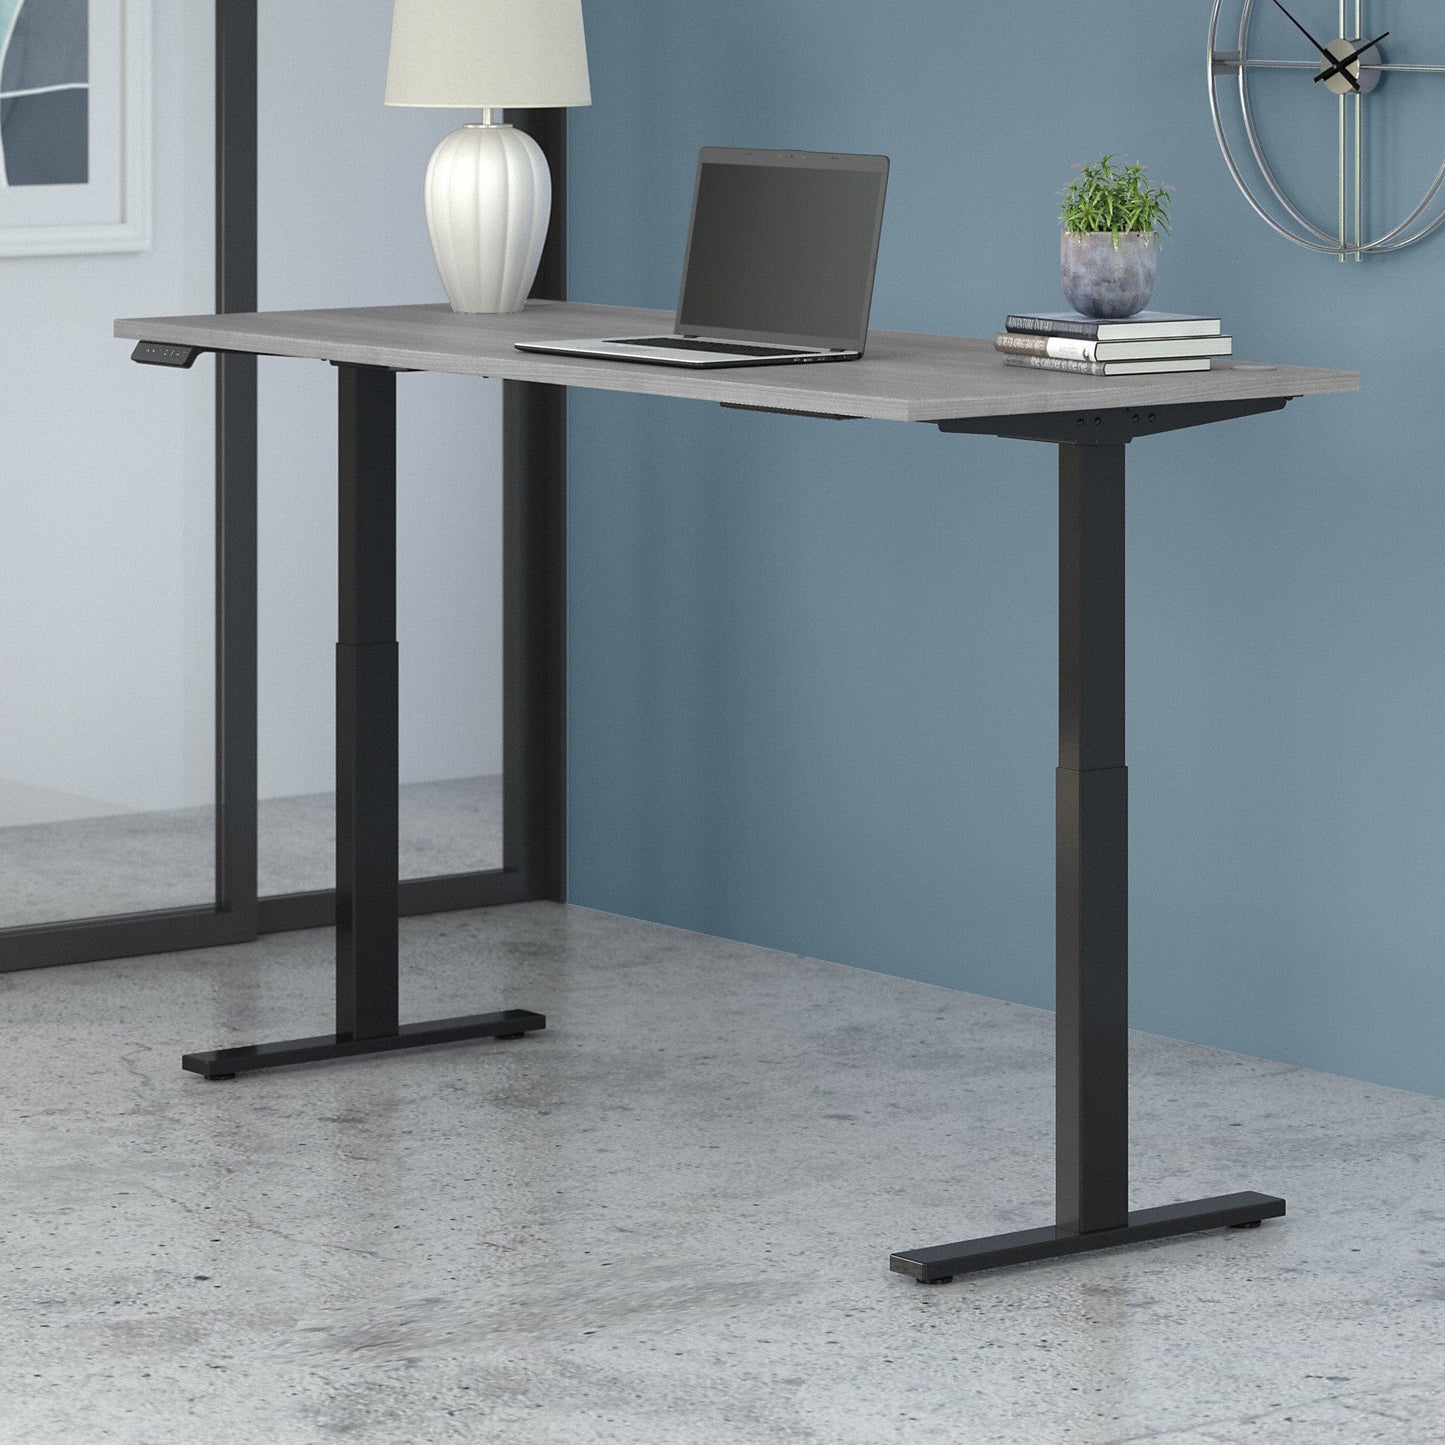 StandUp Desk Depot Move 60 Series by Bush Business Furniture 72W x 30D Electric Height Adjustable Standing Desk